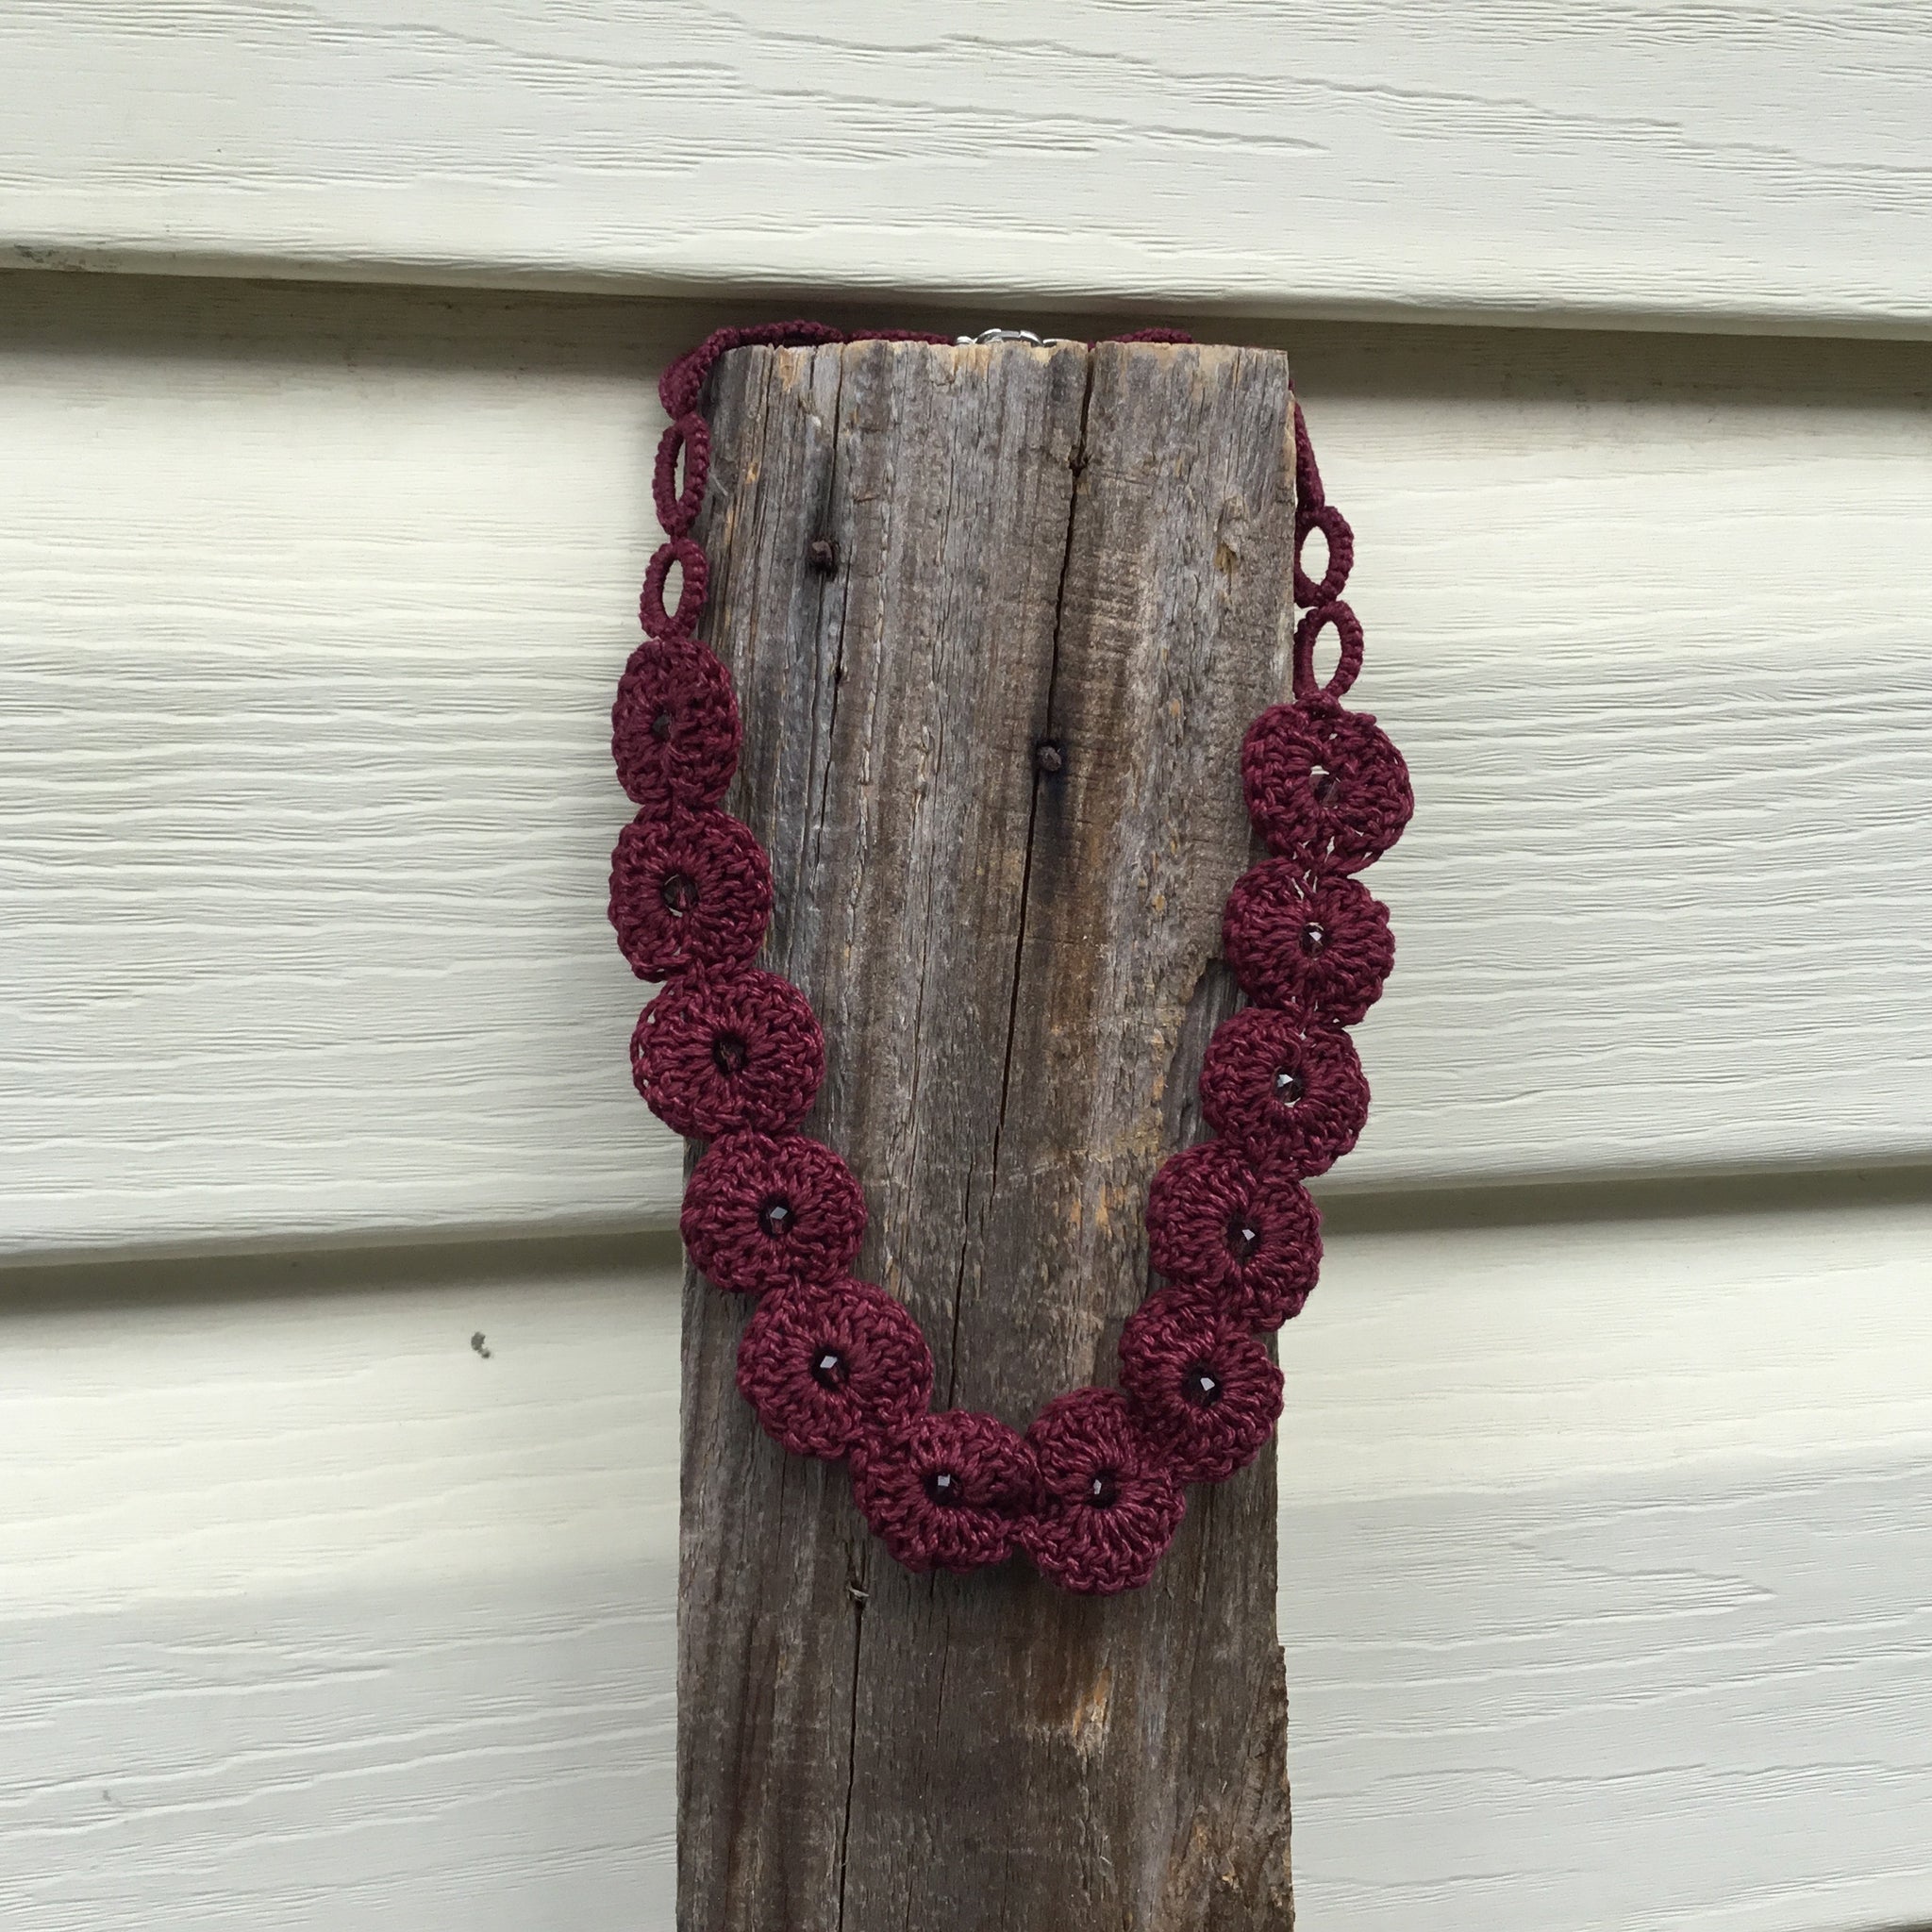 Fair Trade Ethical Tatted Necklace with Glass Beads